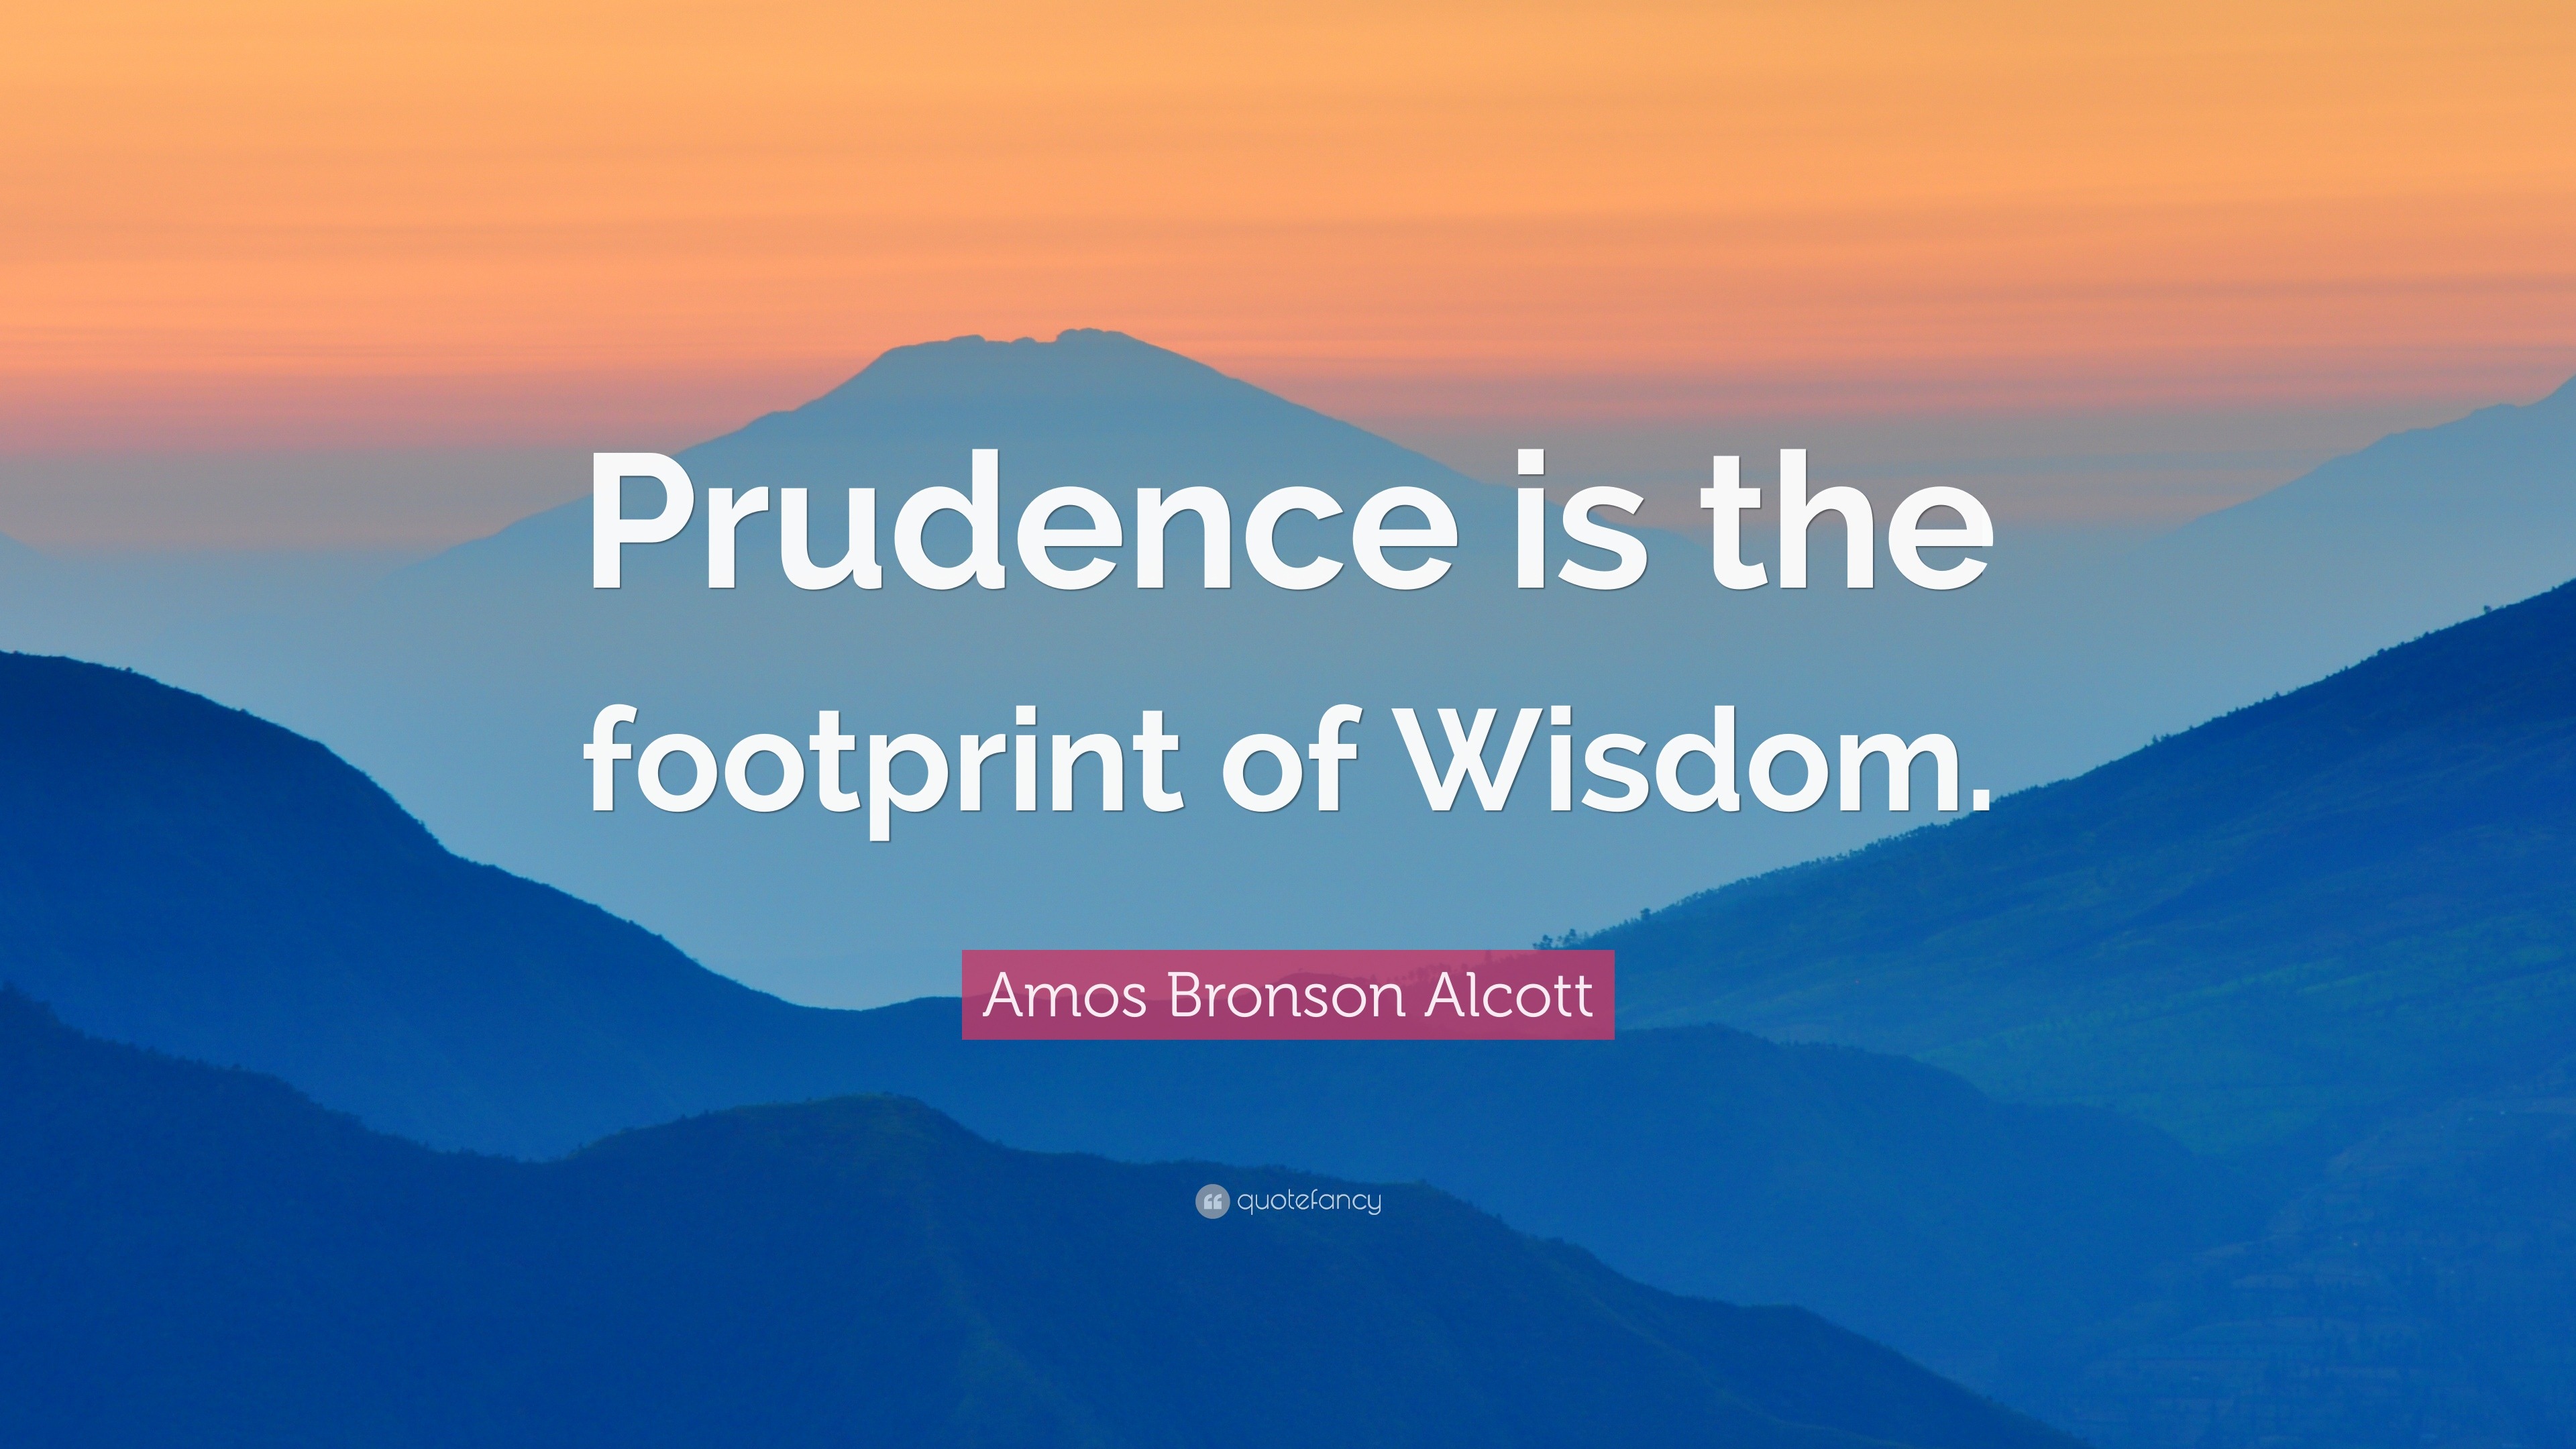 Amos Bronson Alcott Quote: “Prudence is the footprint of Wisdom.”